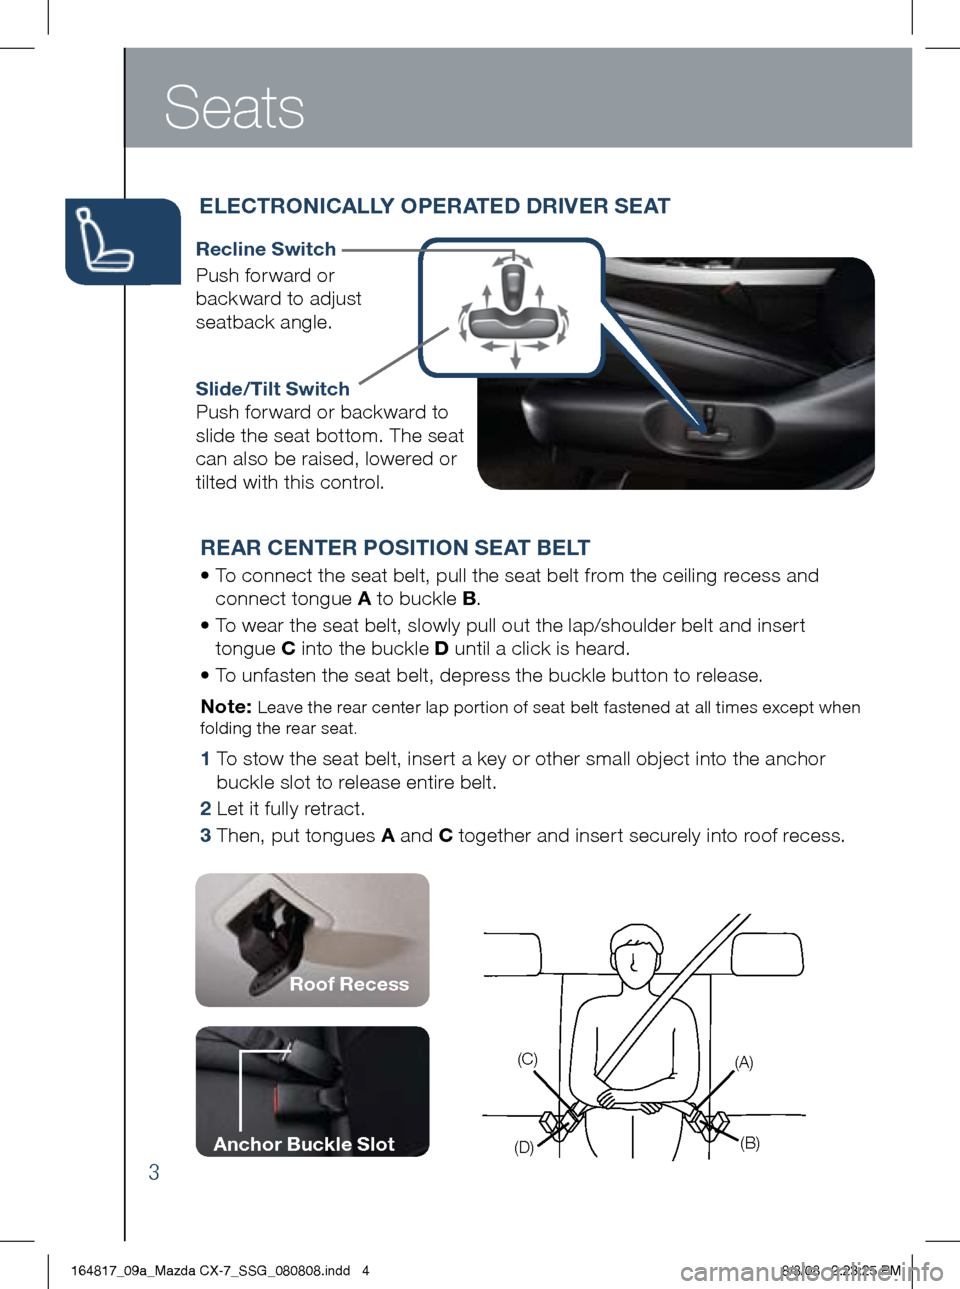 MAZDA MODEL CX-7 2009  Smart Start Guide (in English) 3
Seats
ELECTRONiCALLY OPERATED DR iVER SEAT  
Recline Switch
	 Push	forward	or 	
backward 	to 	adjust	
seatback 	angle.
REAR CENTER POS iT iON SEAT BELT
•		 To	connect	the	seat	belt,	pull	the	seat	